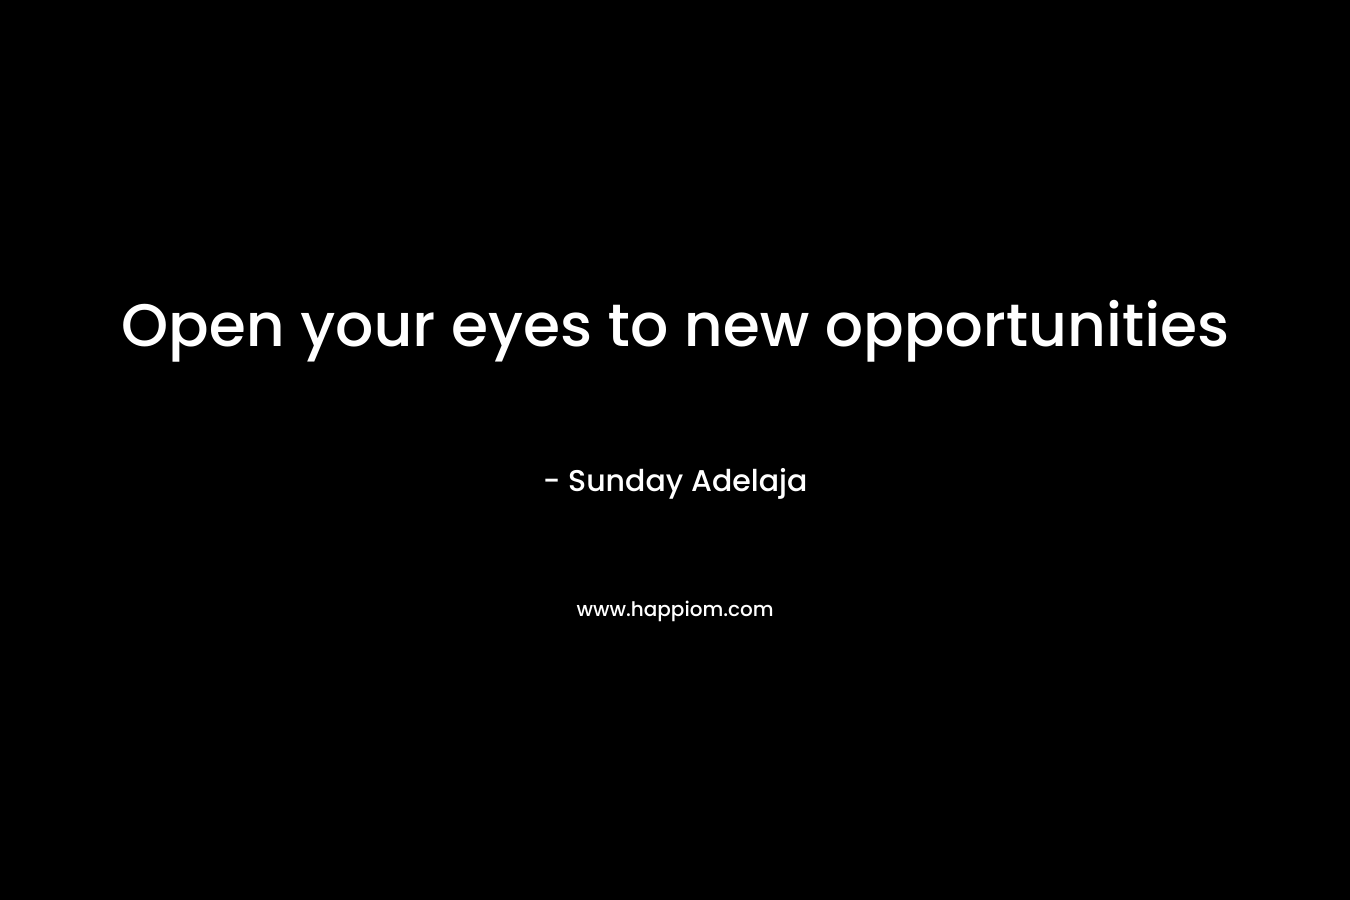 Open your eyes to new opportunities